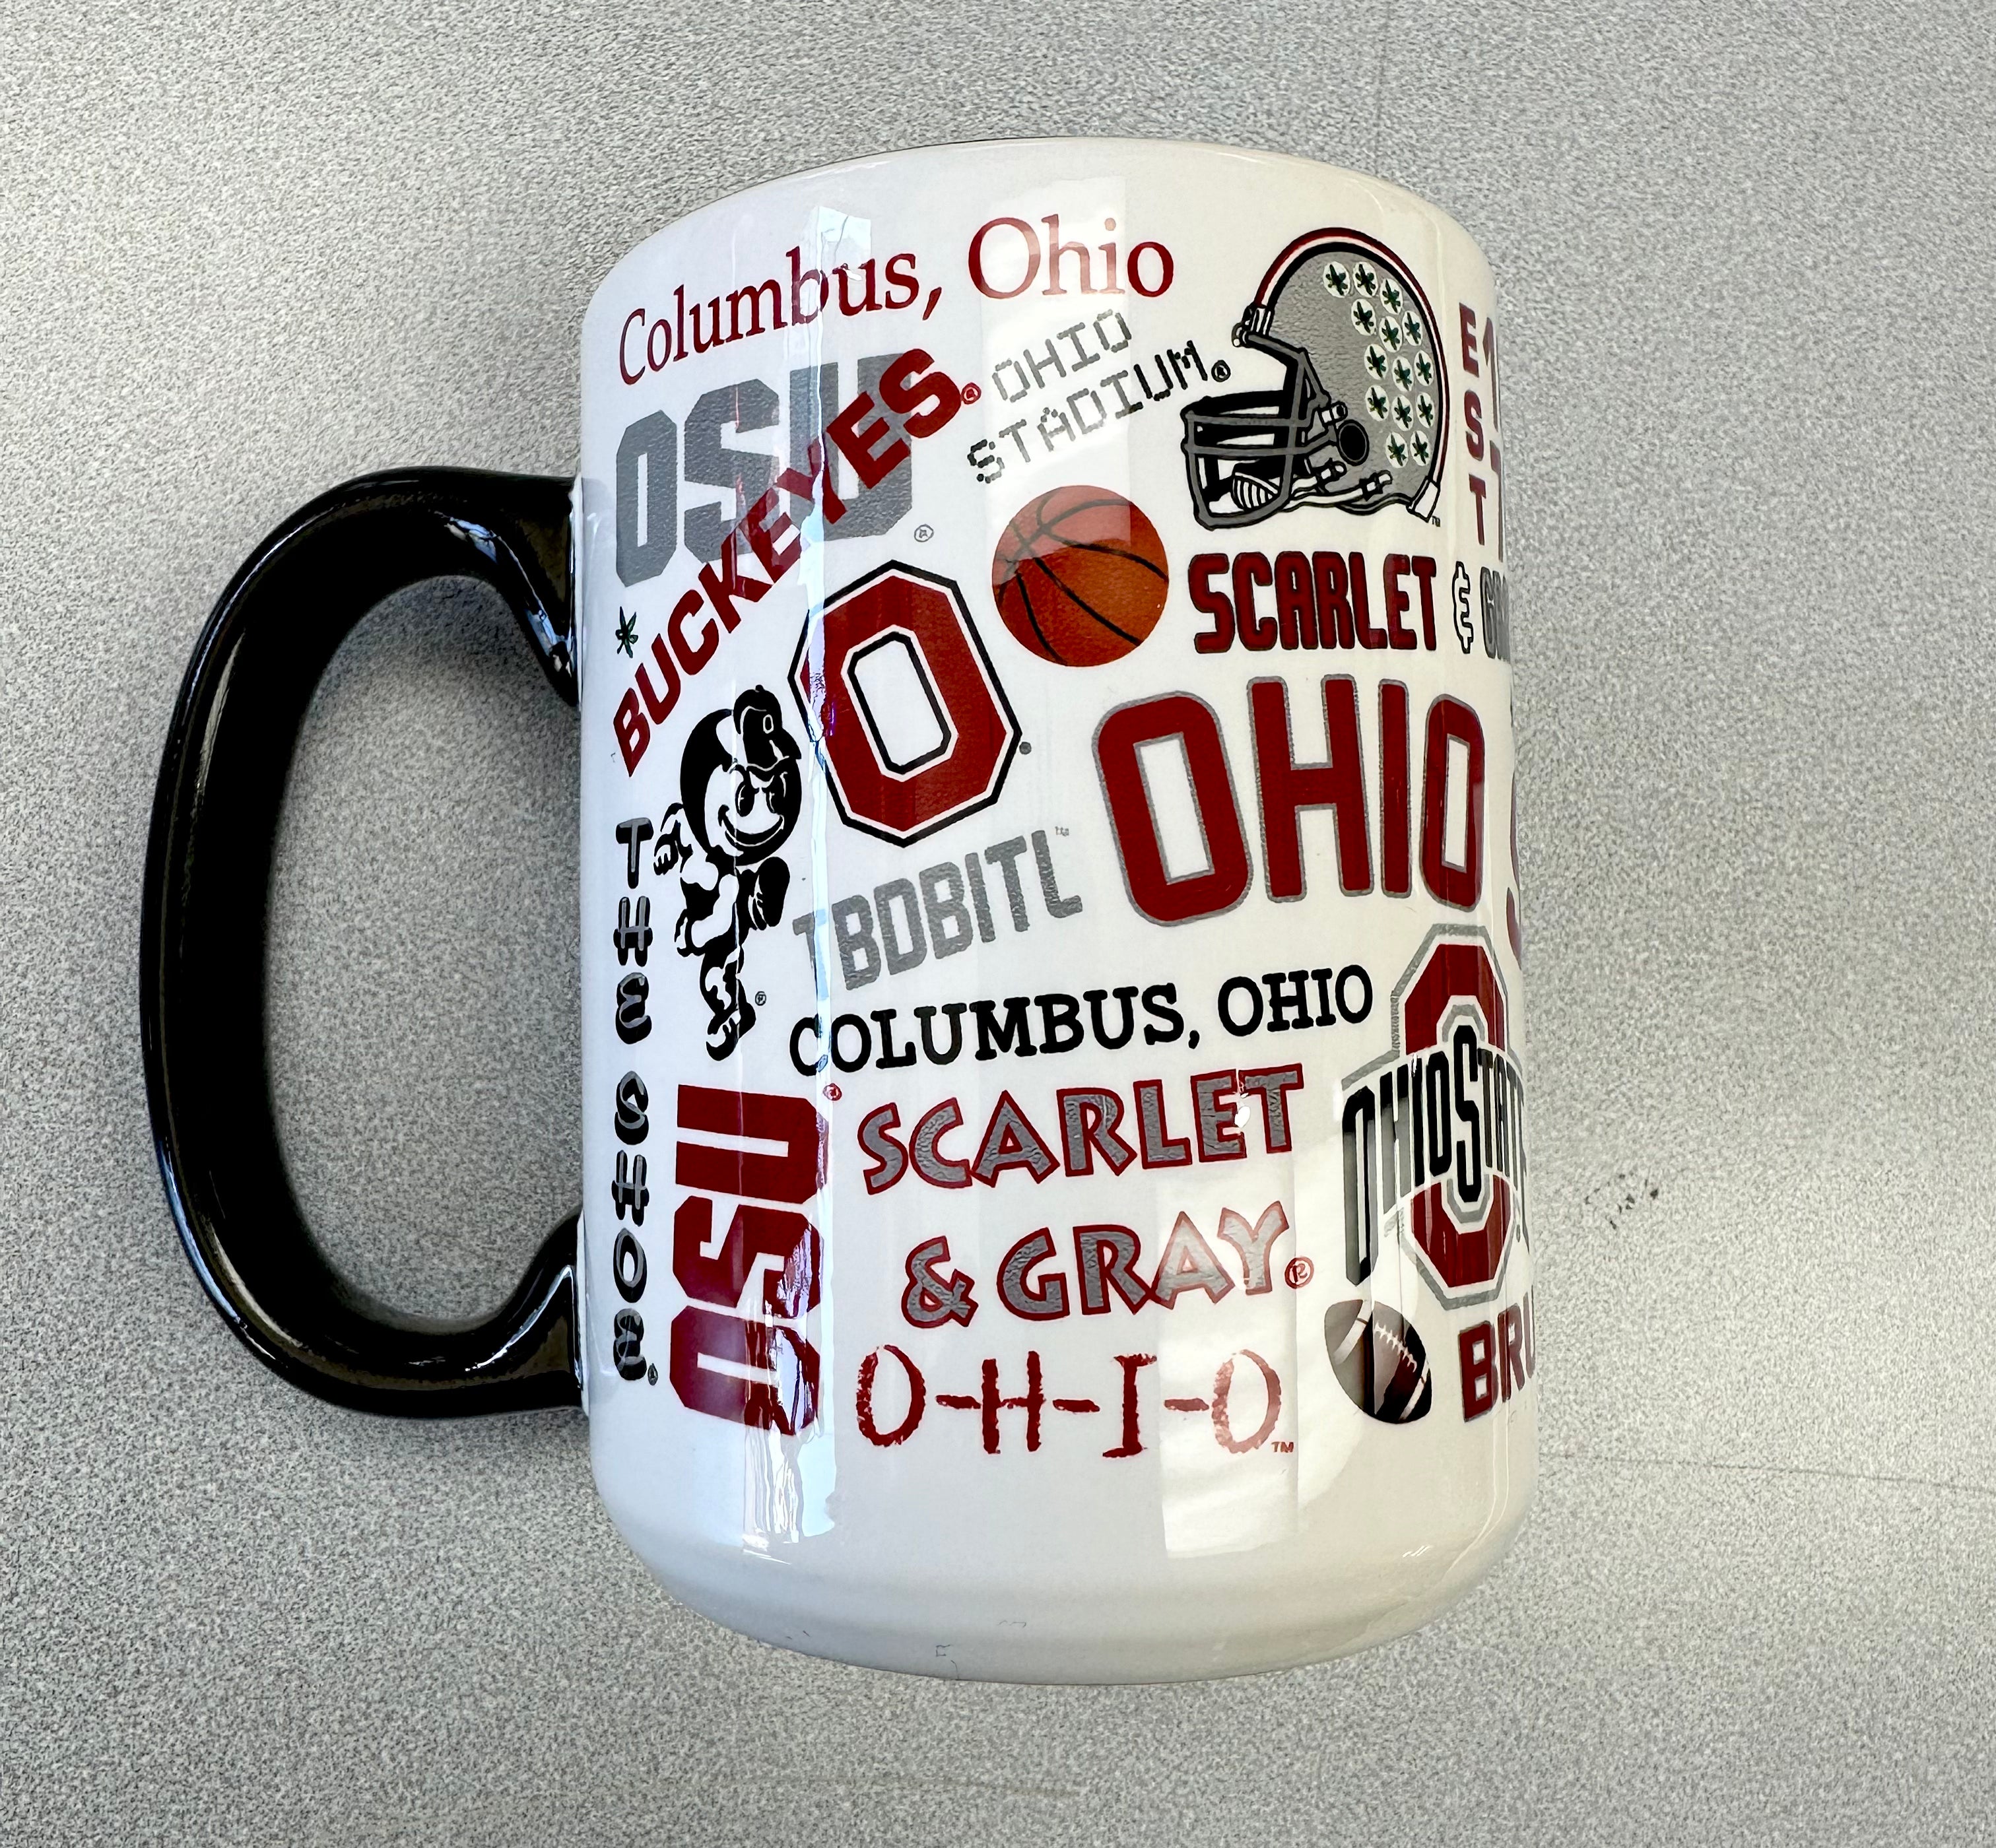 OHIO STATE BUCKEYES SPECKLED TUMBLER: STYLISH HYDRATION FOR THE TRUE FAN